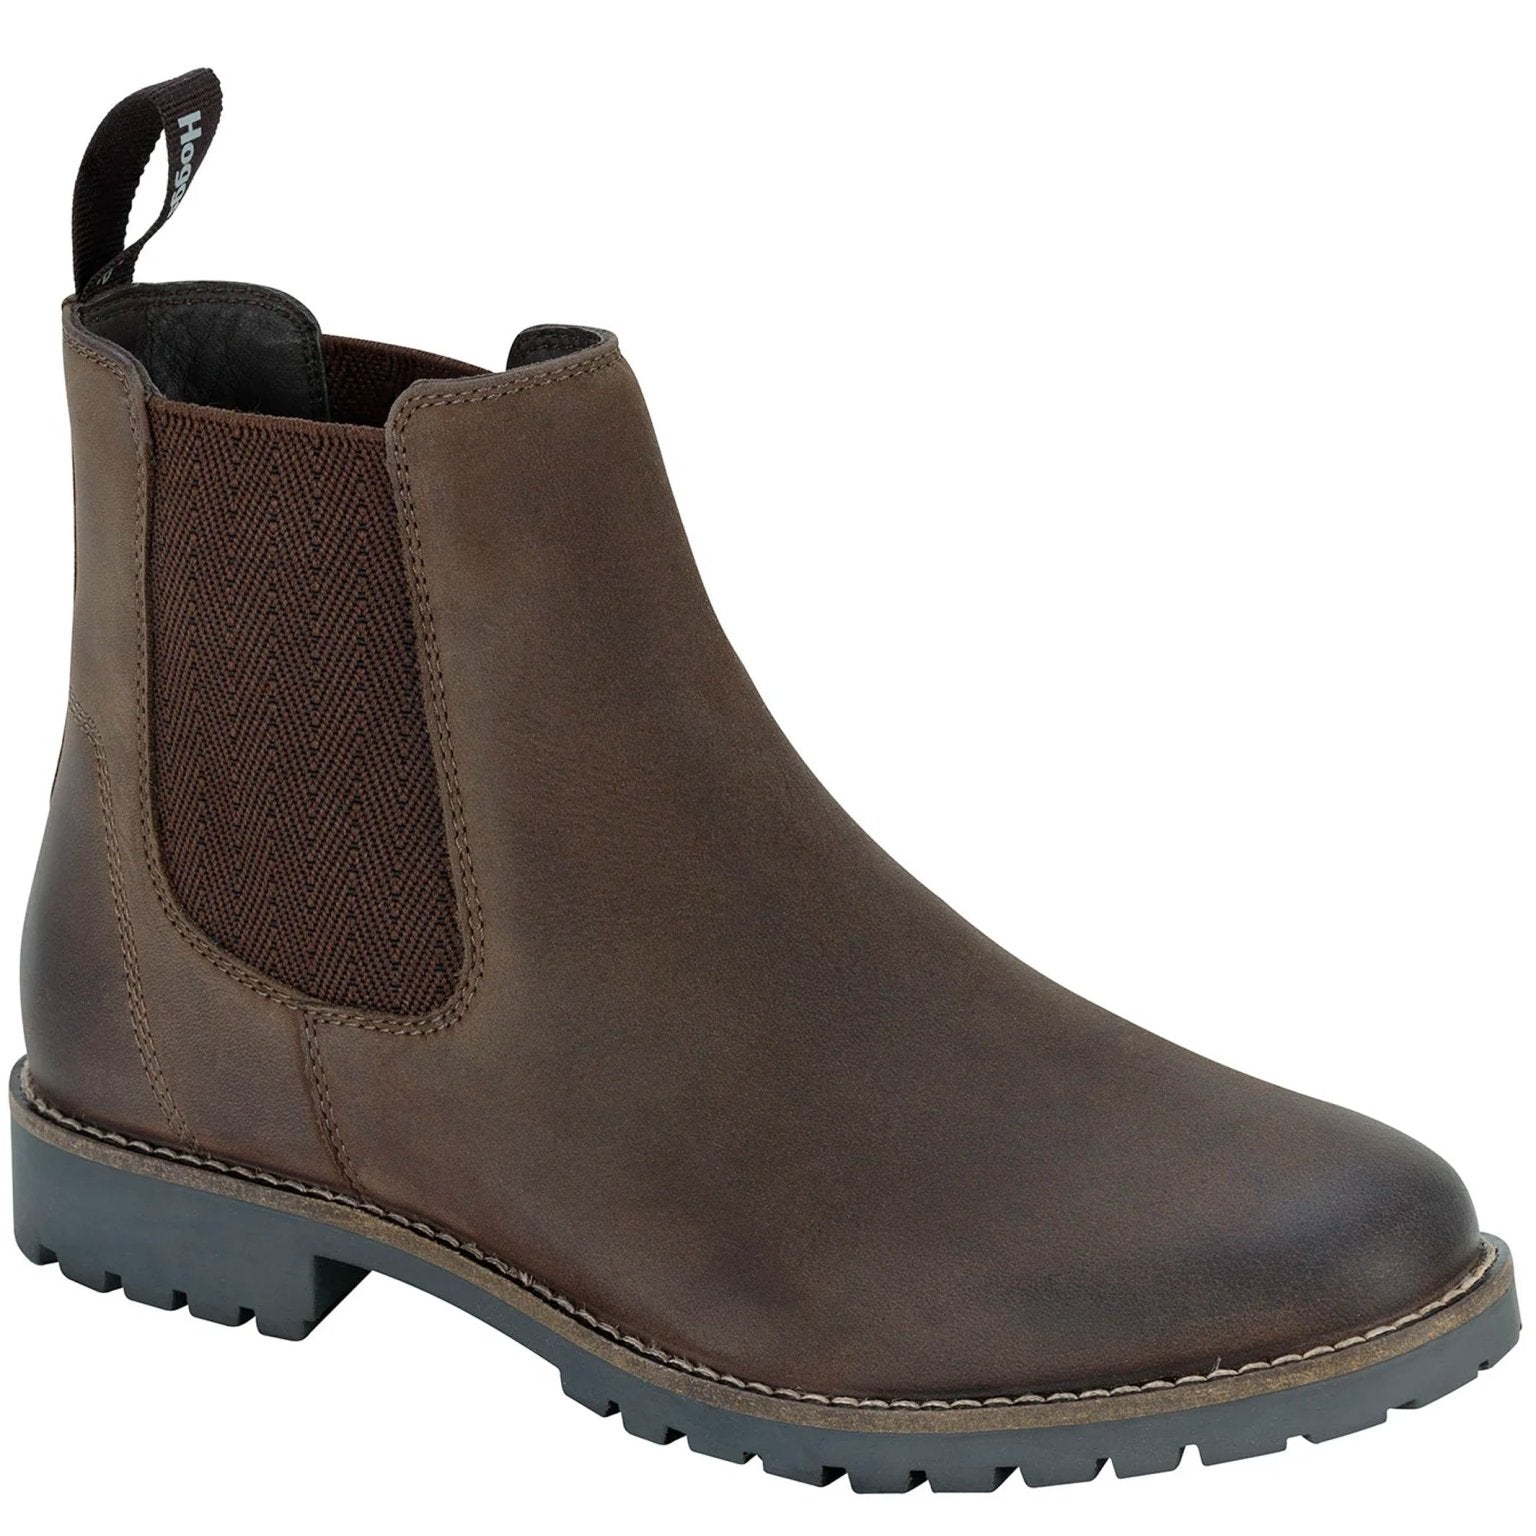 4elementsclothingHoggs of FifeHoggs of Fife - Ladies Boot / Classic Jodhpur Dealer / Chelsea BootBoots1079/BR/36